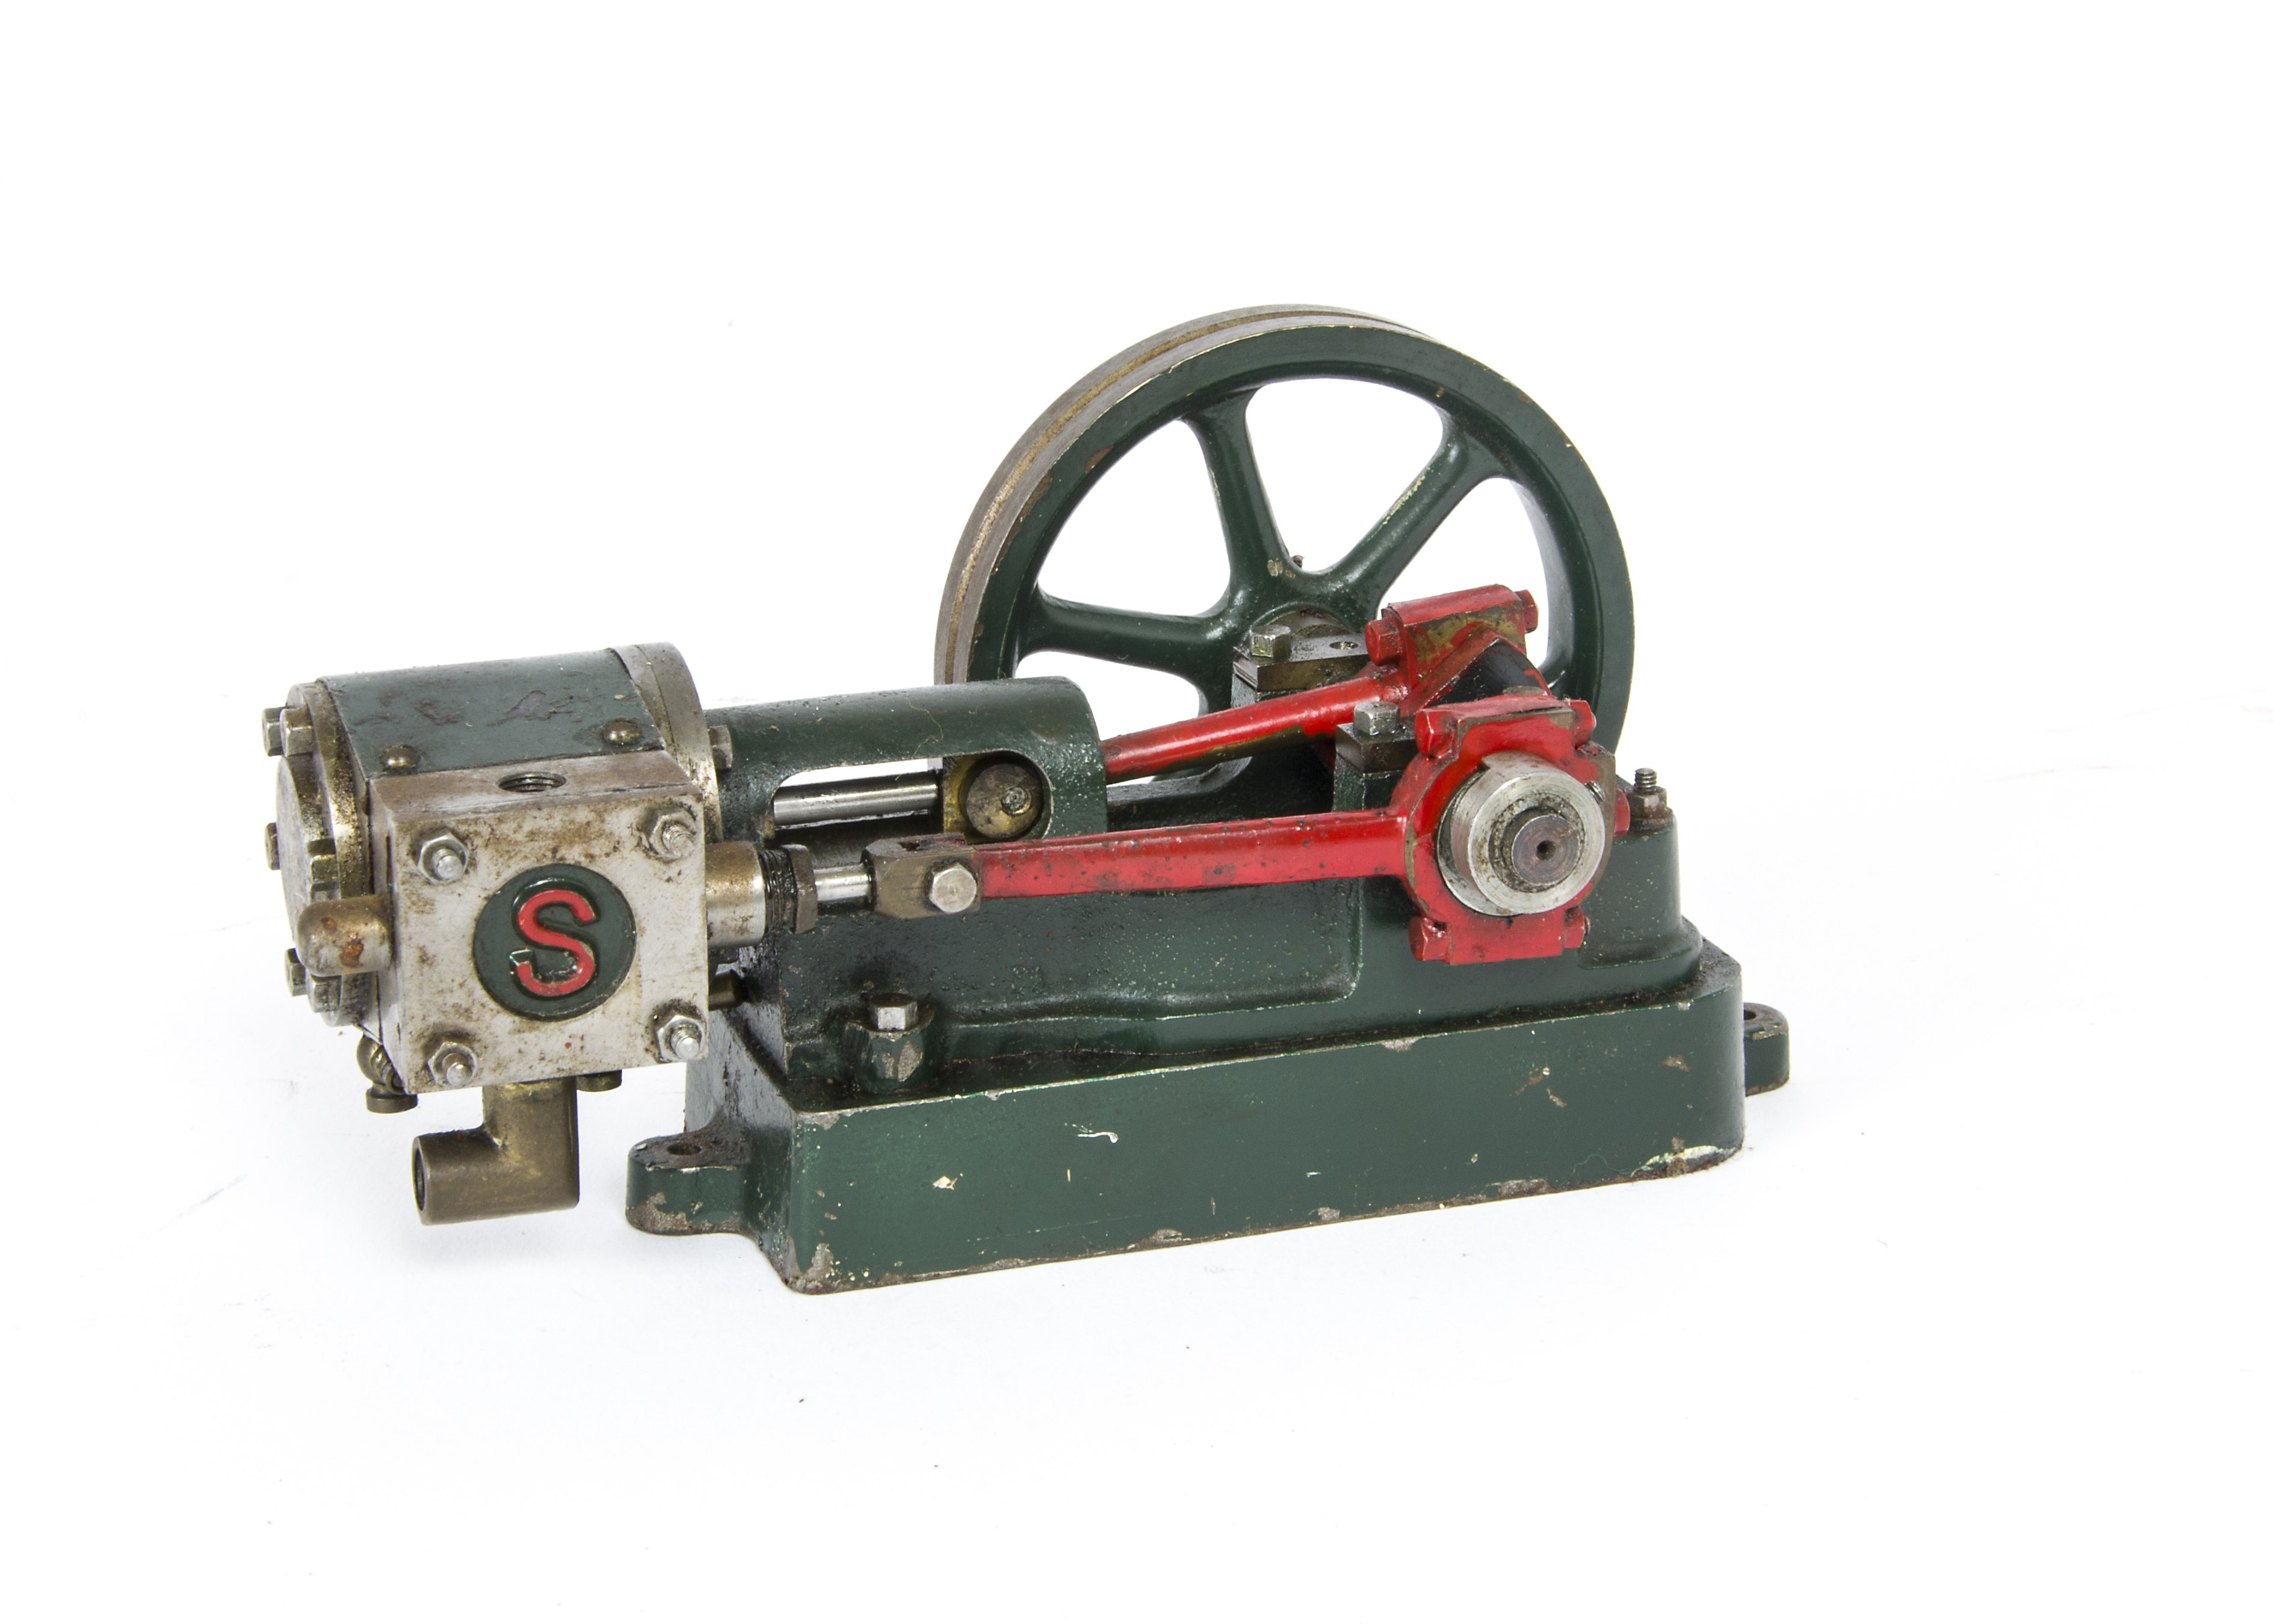 A Stuart Turner 10H Horizontal Steam Engine, well-made and painted in green with red connecting